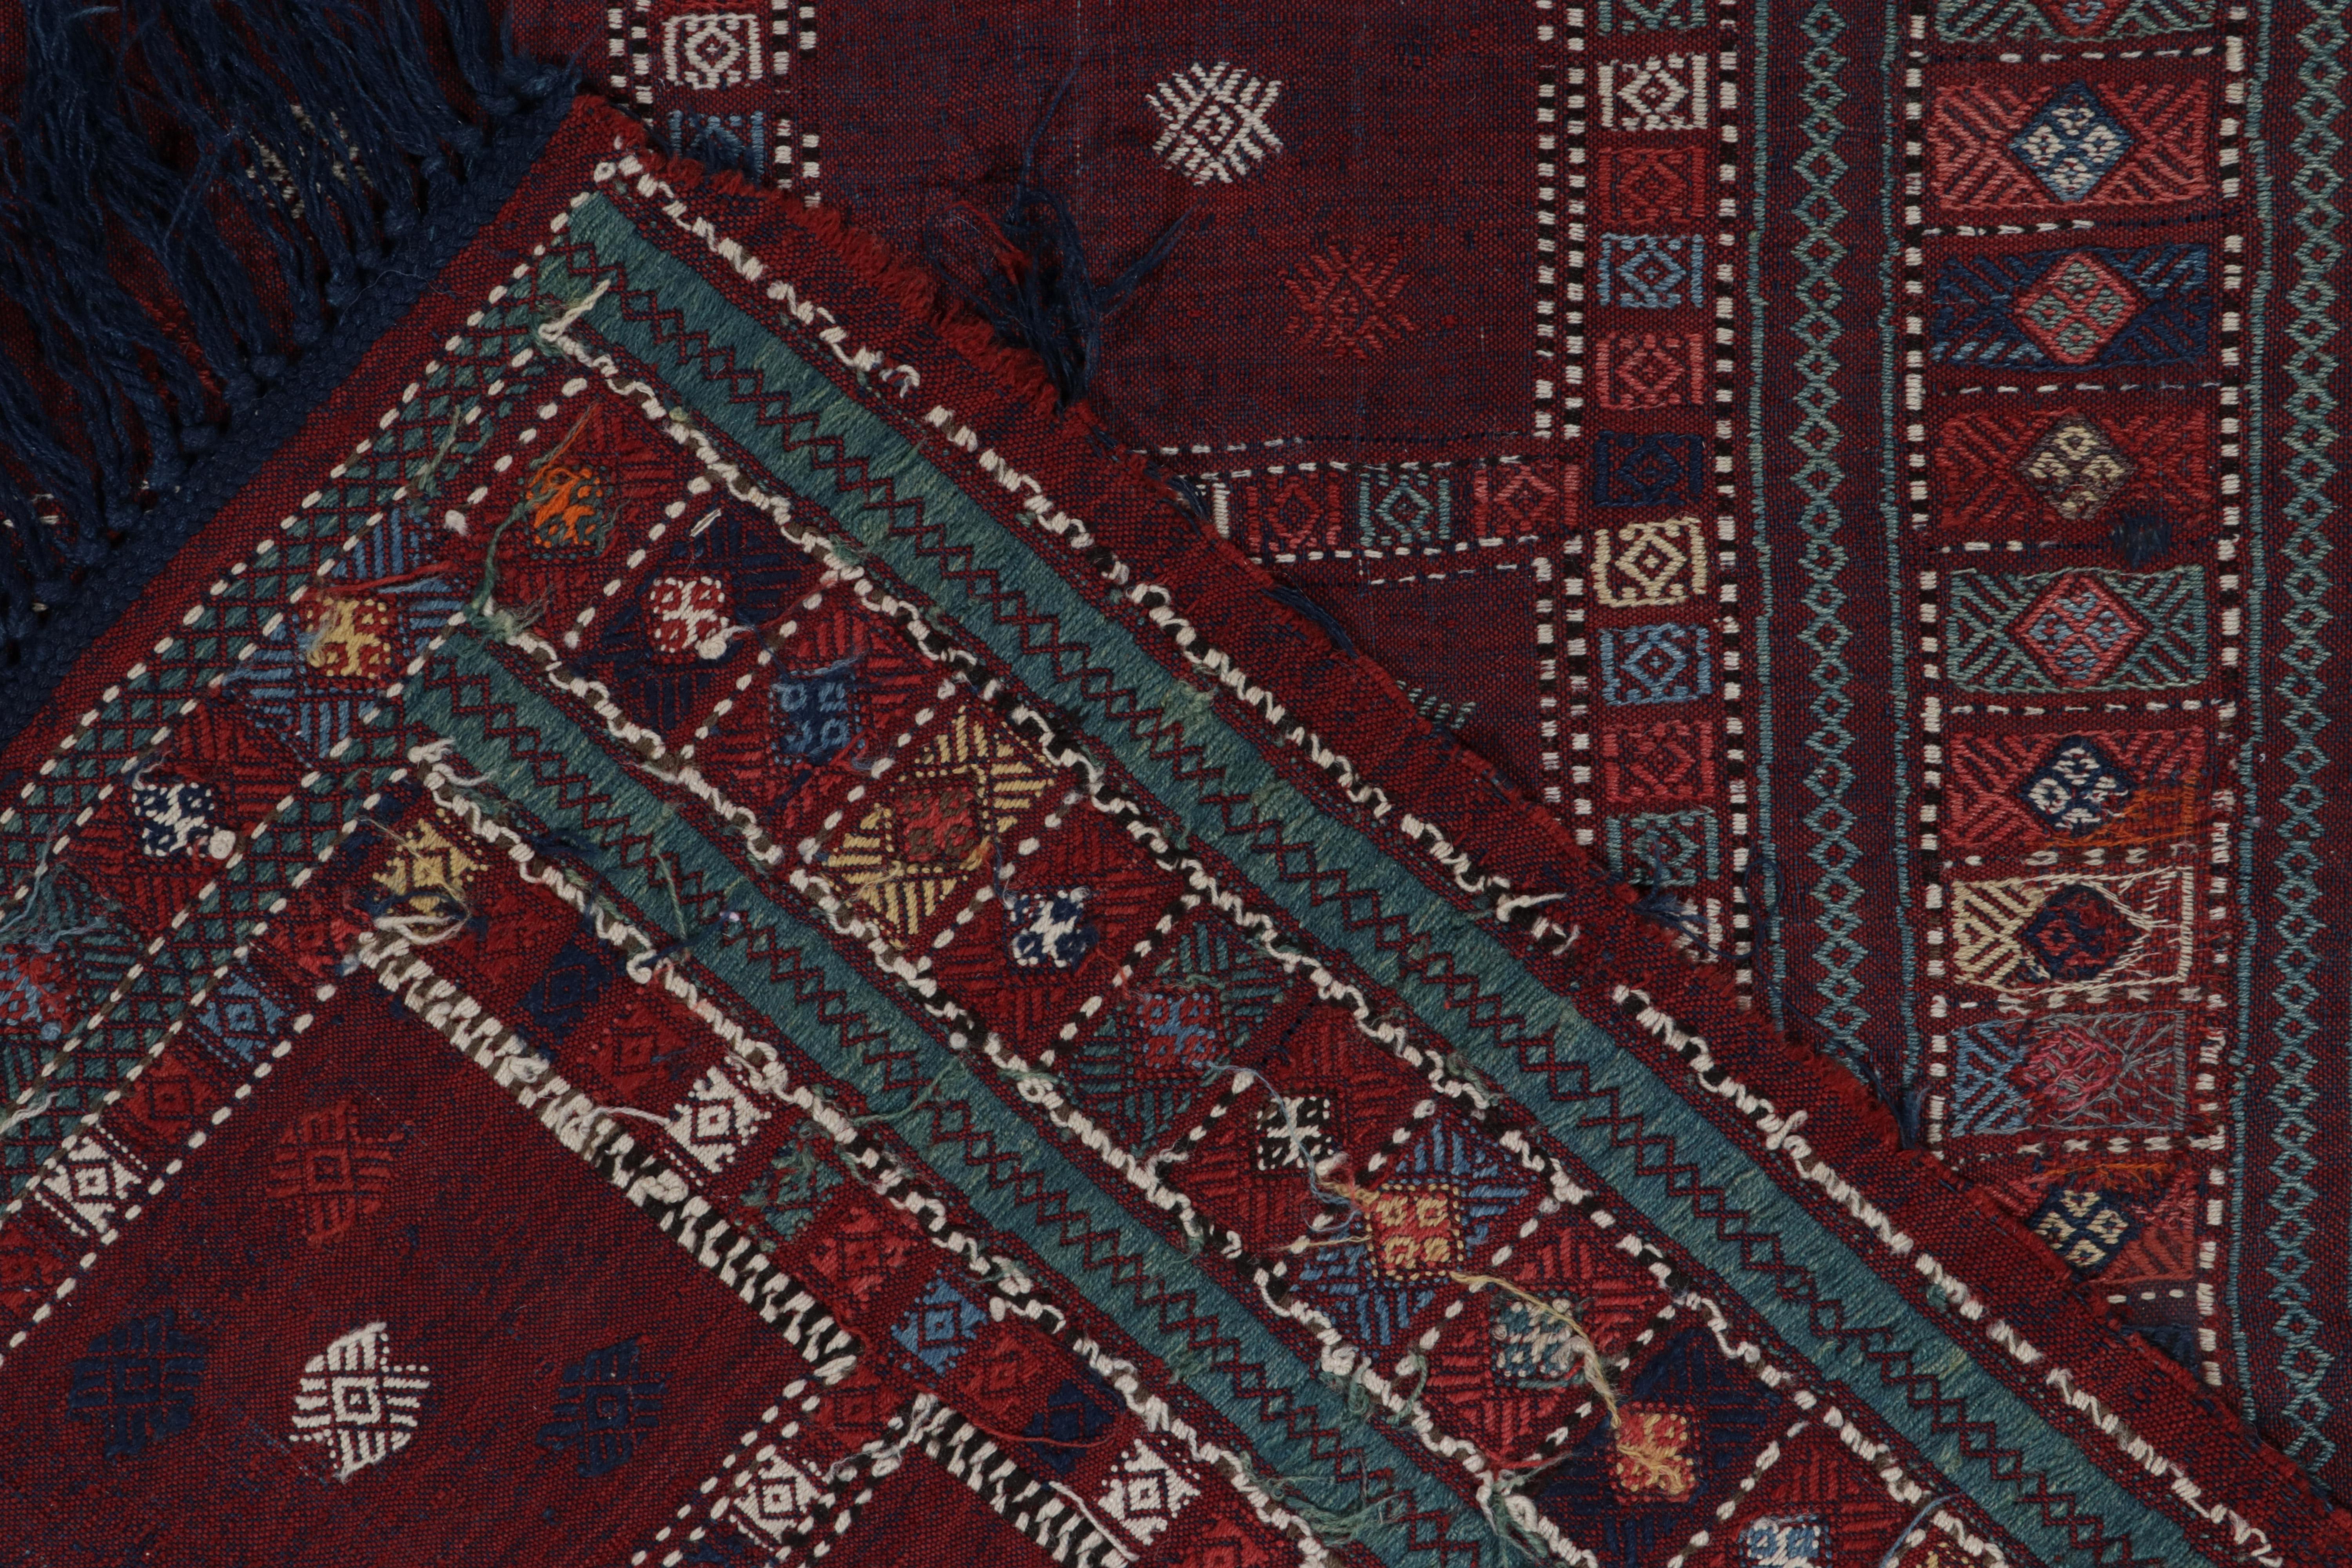 Early 20th Century Antique Russian Kilim in Red, Blue & White Geometric Patterns by Rug & Kilim For Sale